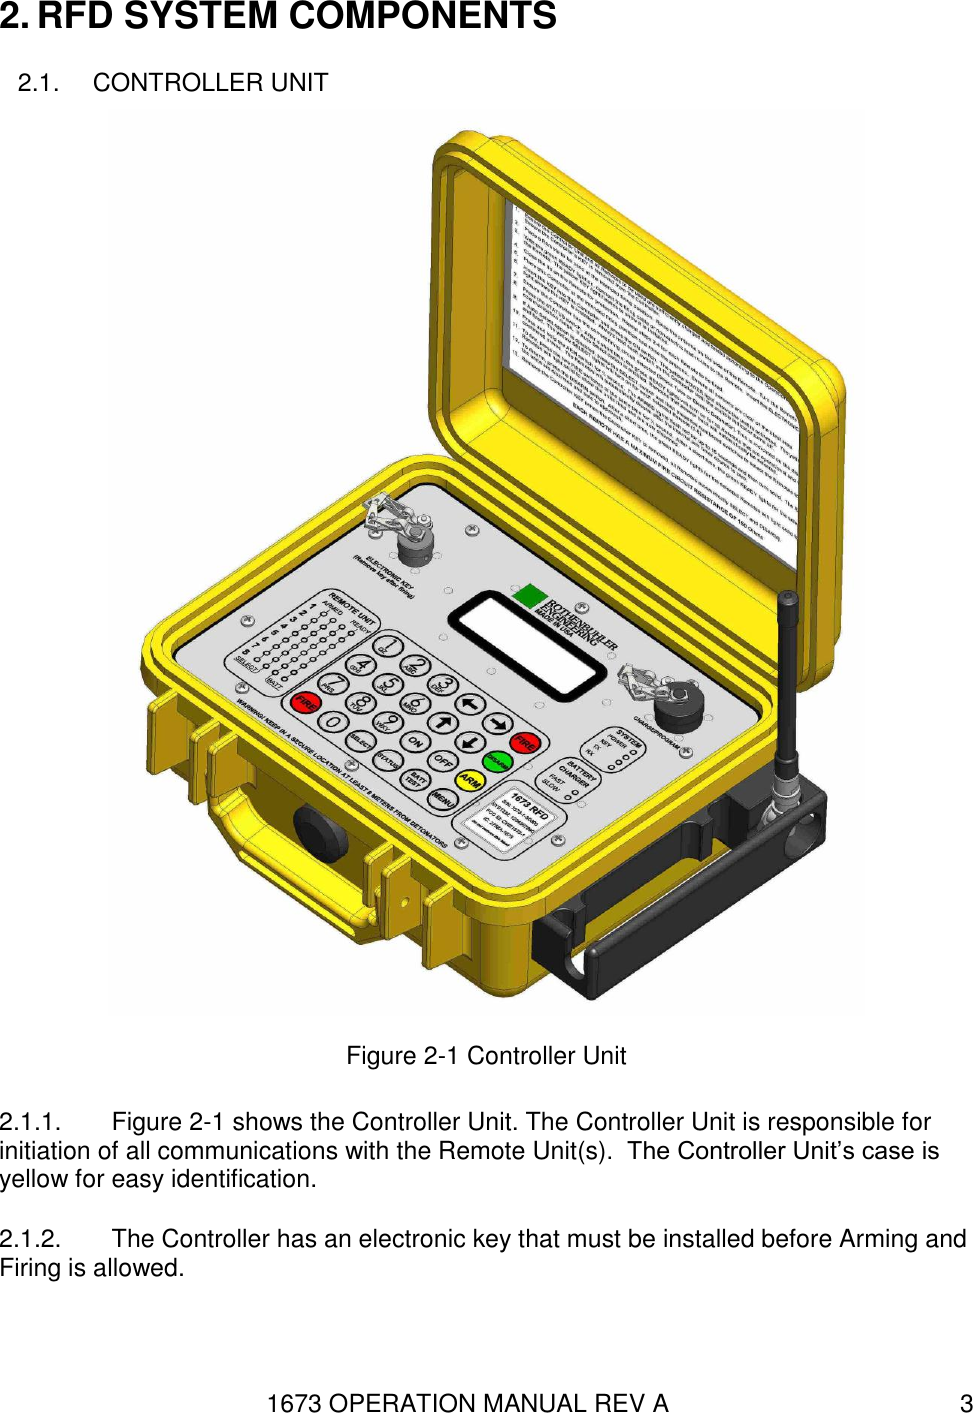 1673 OPERATION MANUAL REV A 3 2. RFD SYSTEM COMPONENTS 2.1.  CONTROLLER UNIT  Figure 2-1 Controller Unit 2.1.1.  Figure 2-1 shows the Controller Unit. The Controller Unit is responsible for initiation of all communications with the Remote Unit(s).  The Controller Unit’s case is yellow for easy identification. 2.1.2.  The Controller has an electronic key that must be installed before Arming and Firing is allowed. 